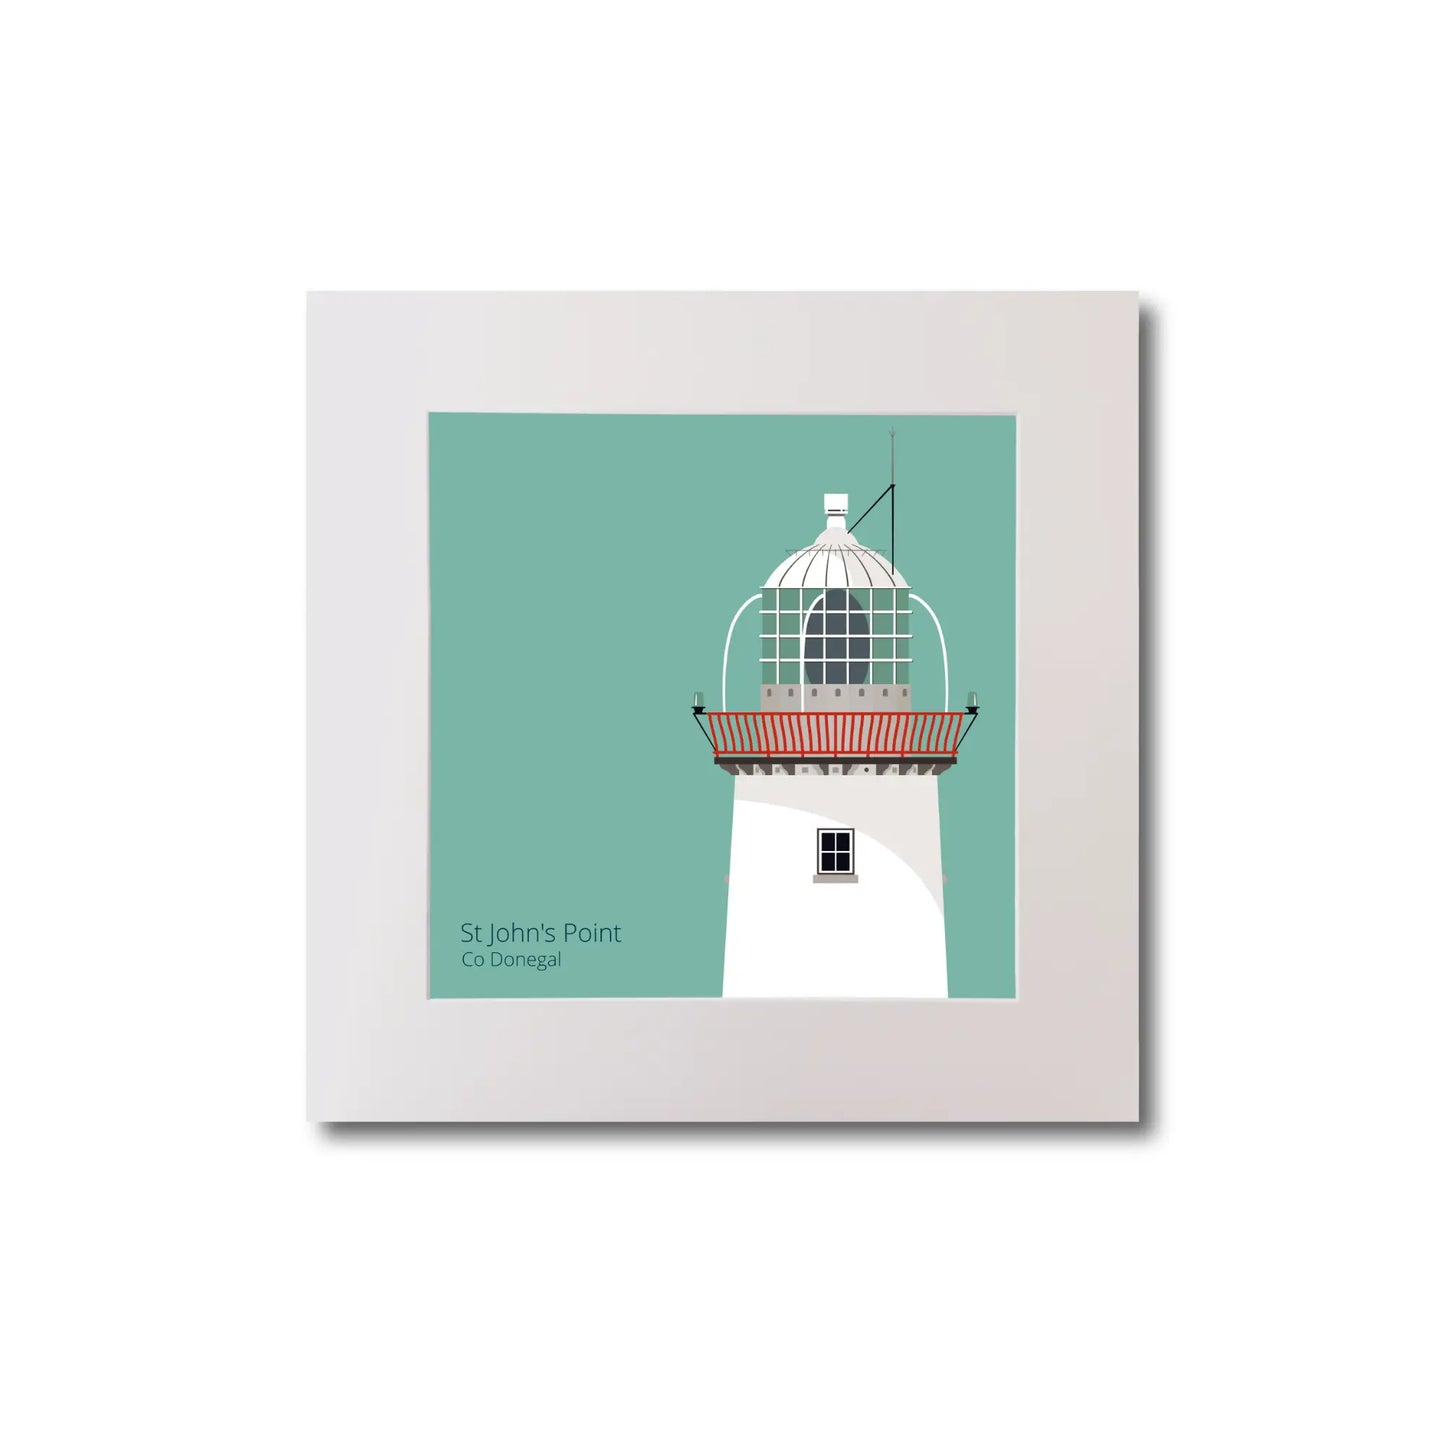 Illustration of St.John's (Donegal) lighthouse on an ocean green background, mounted and measuring 20x20cm.